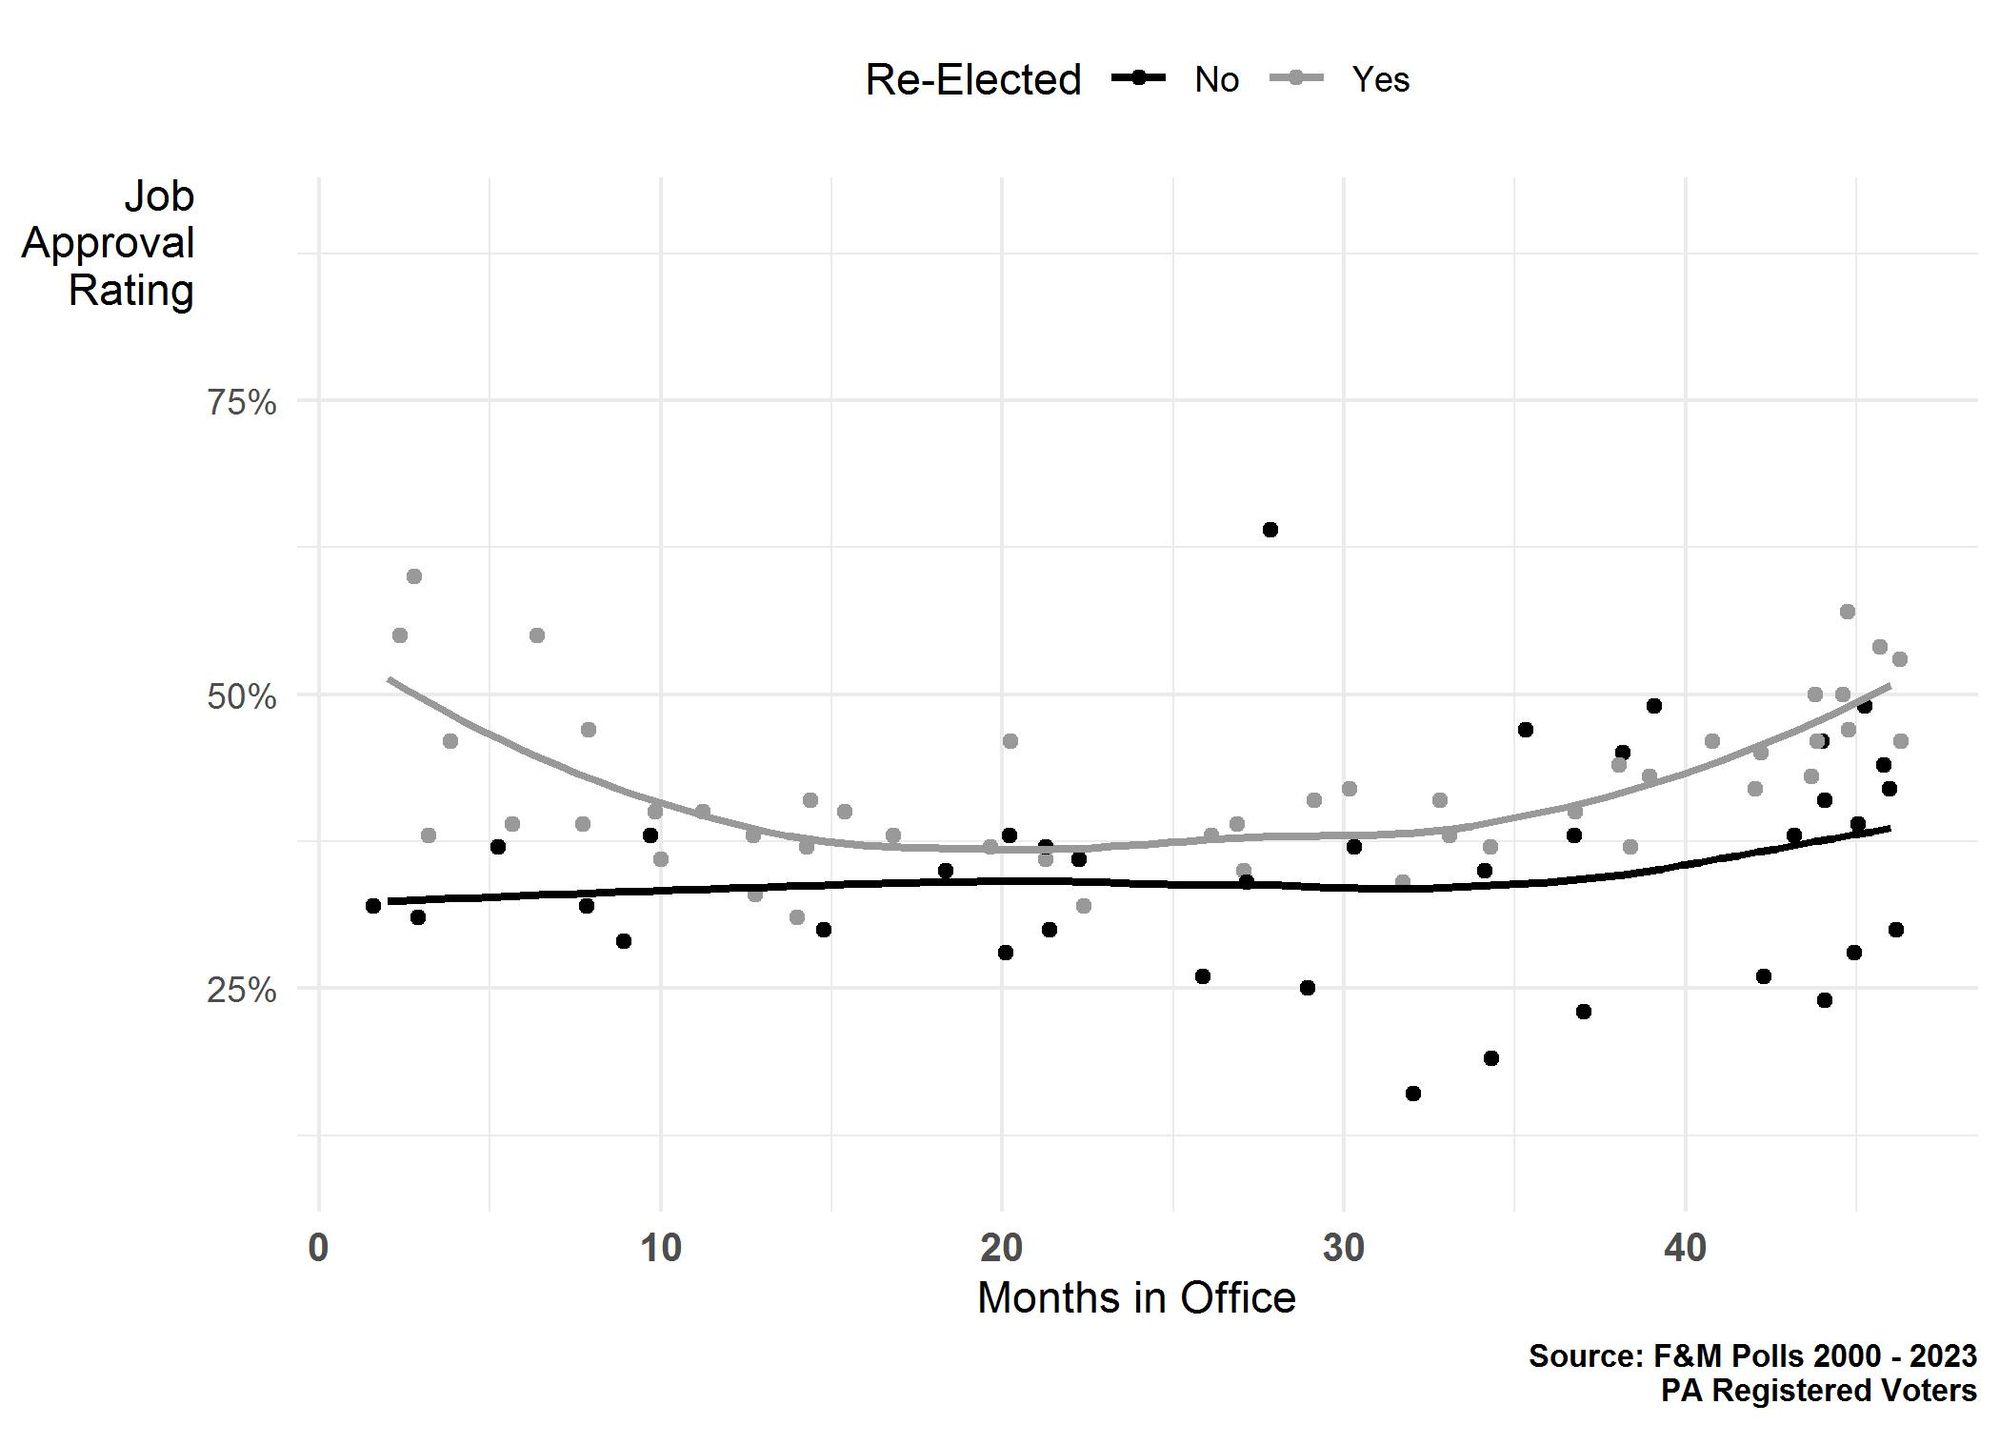 Figure 2. Scatter plot showing the positive job approval ratings for Pennsylvania governors and U.S. presidents among Pennsylvania registered voters during their first terms in office, according to whether they won re-election to a second term. Data from multiple Franklin & Marshall College Polls, 2000 - 2003.